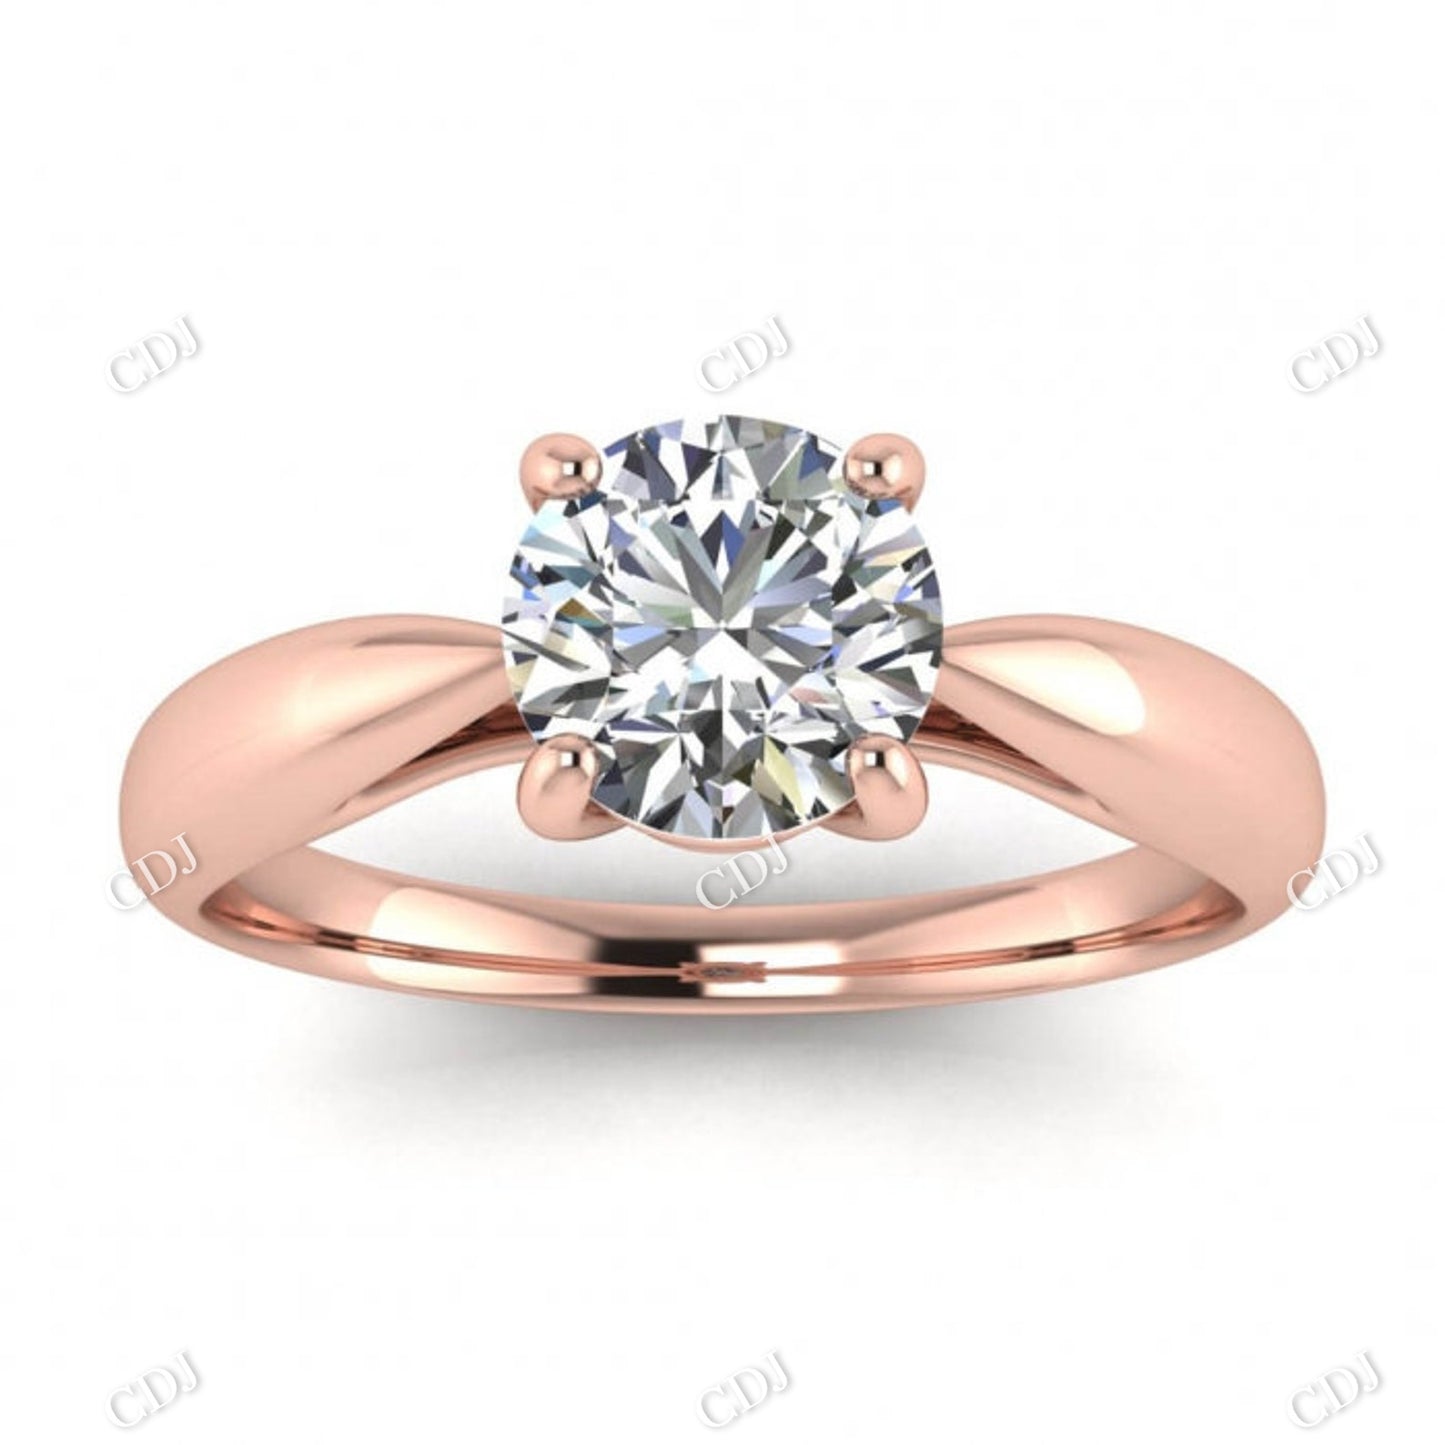 Solid White Gold Tapered Band Solitaire Engagement Ring  customdiamjewel 10KT Rose Gold VVS-EF